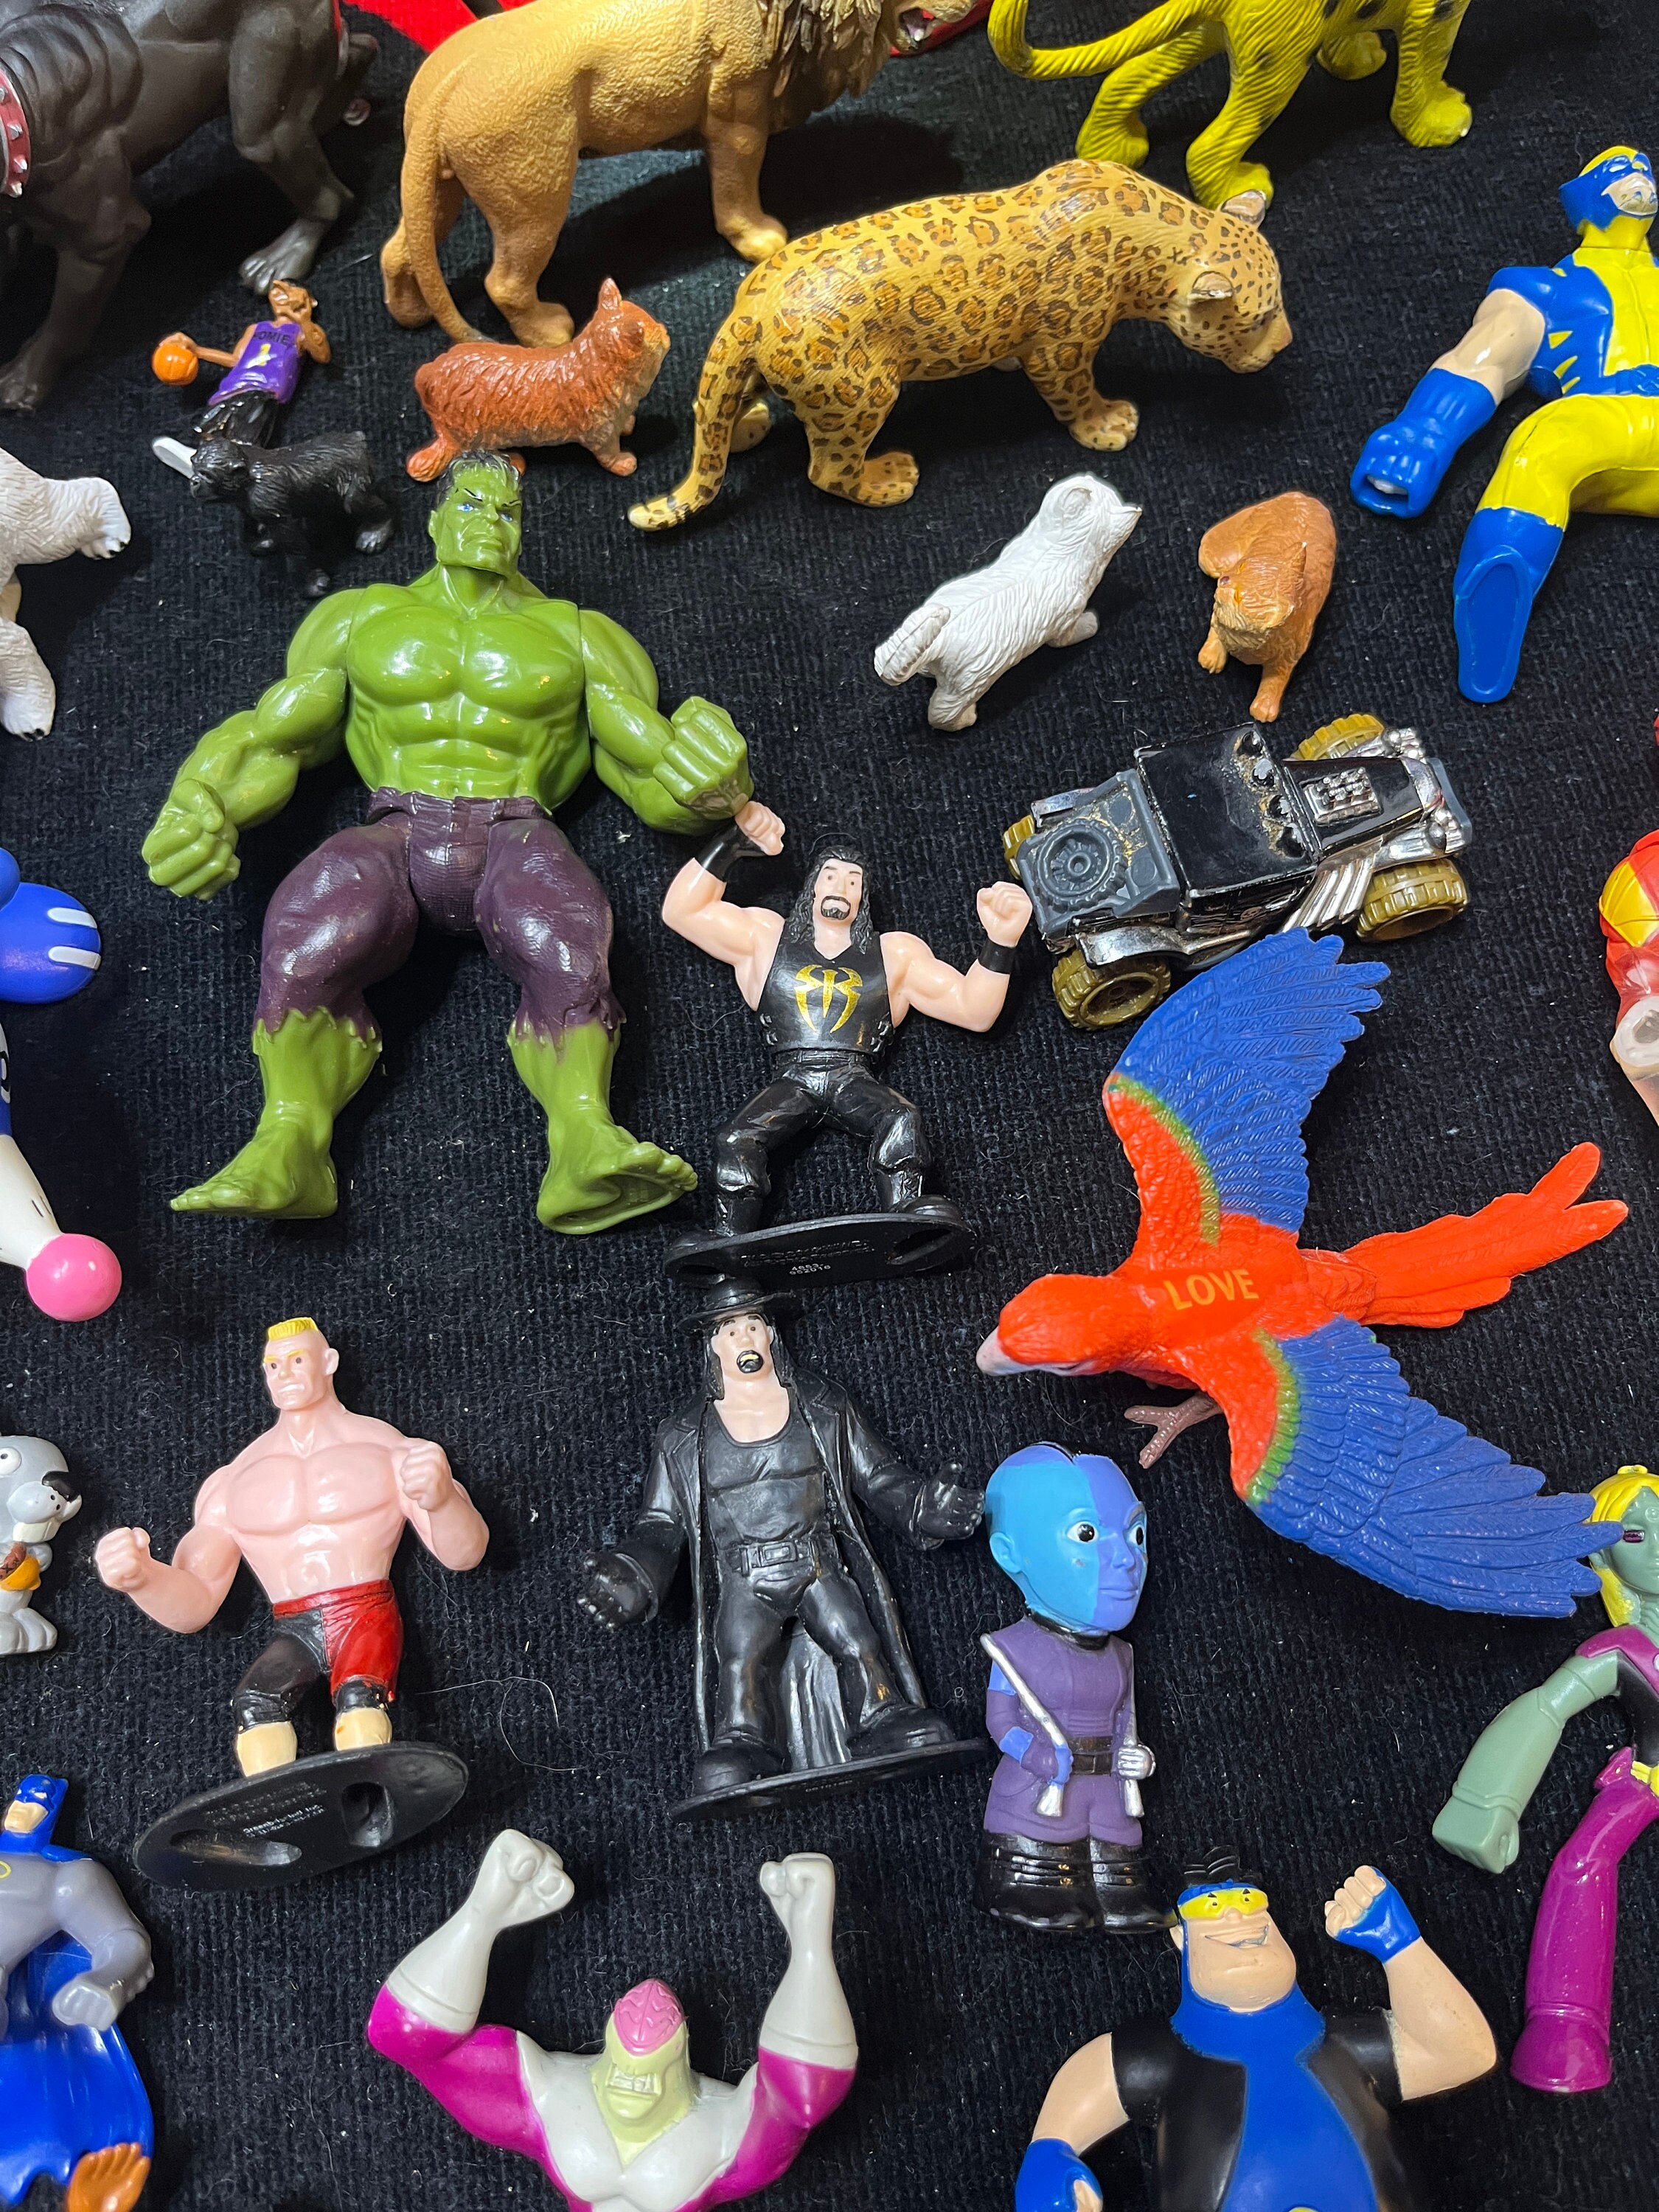 Wide Variety of Collectible Action Figures and Other Toys at a Toy